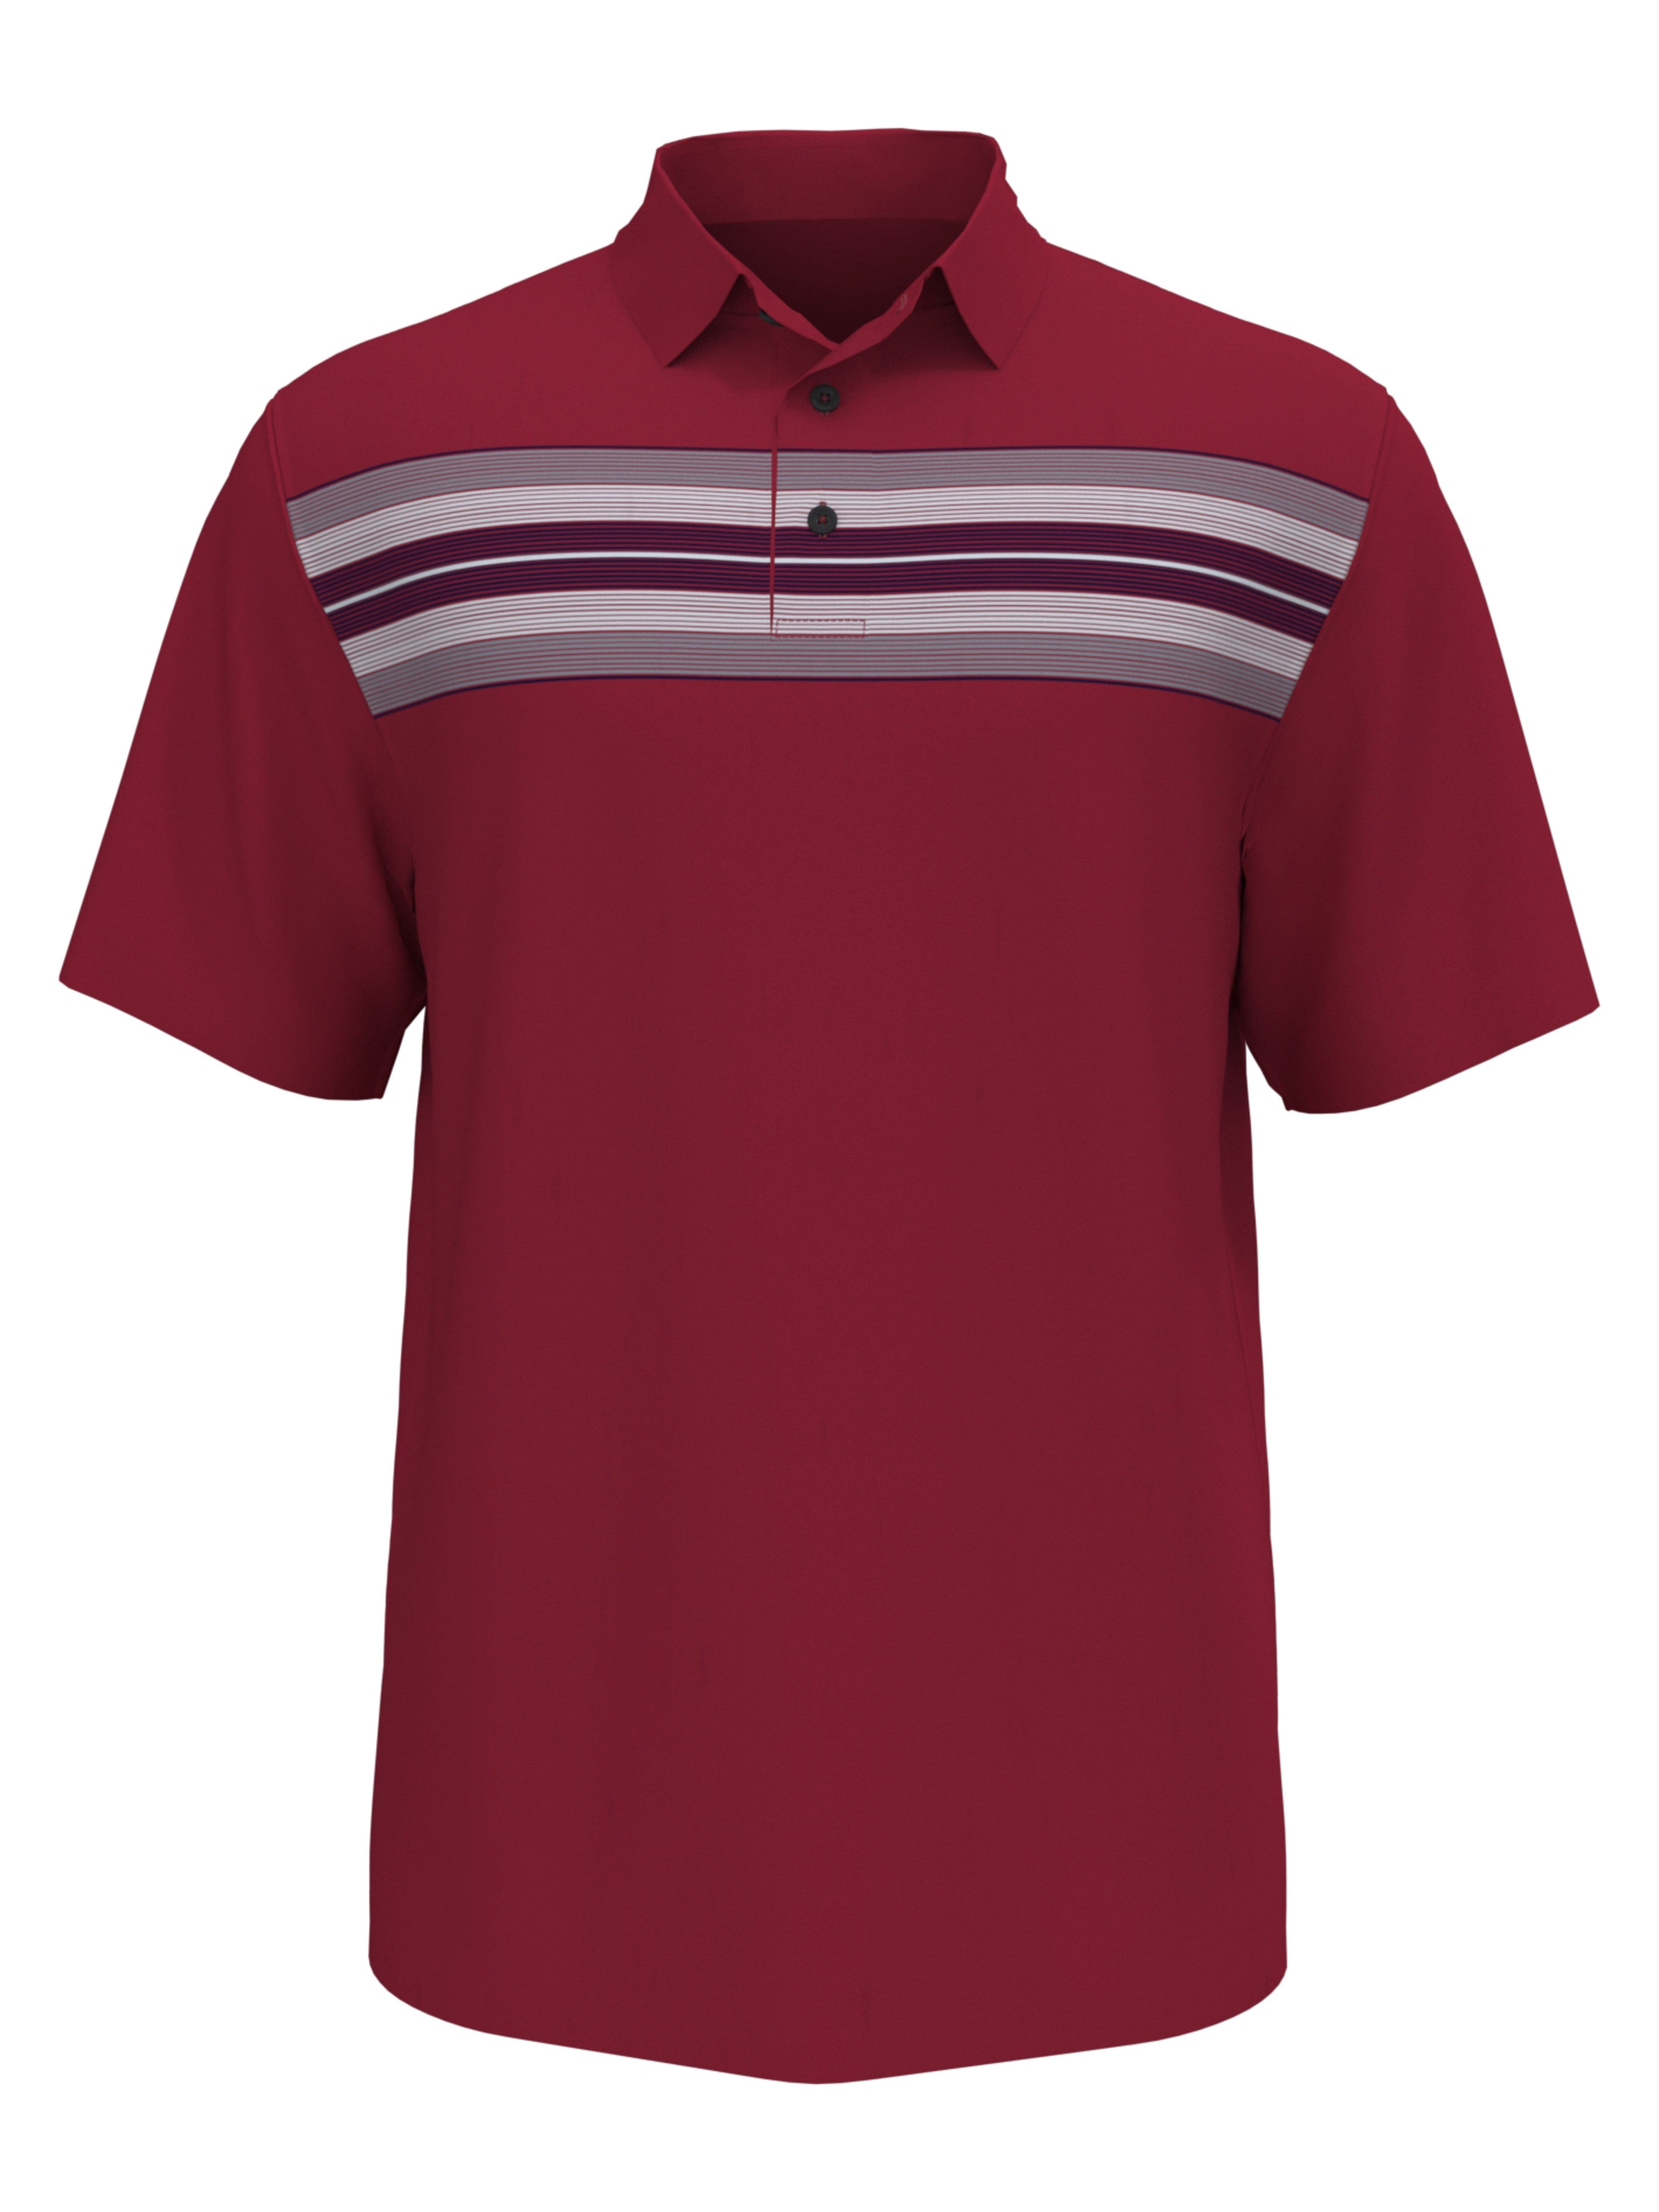 Jack Nicklaus Mens Chest Energy Stripe Polo Shirt, Size Small, Red Bud, 100% Polyester | Golf Apparel Shop